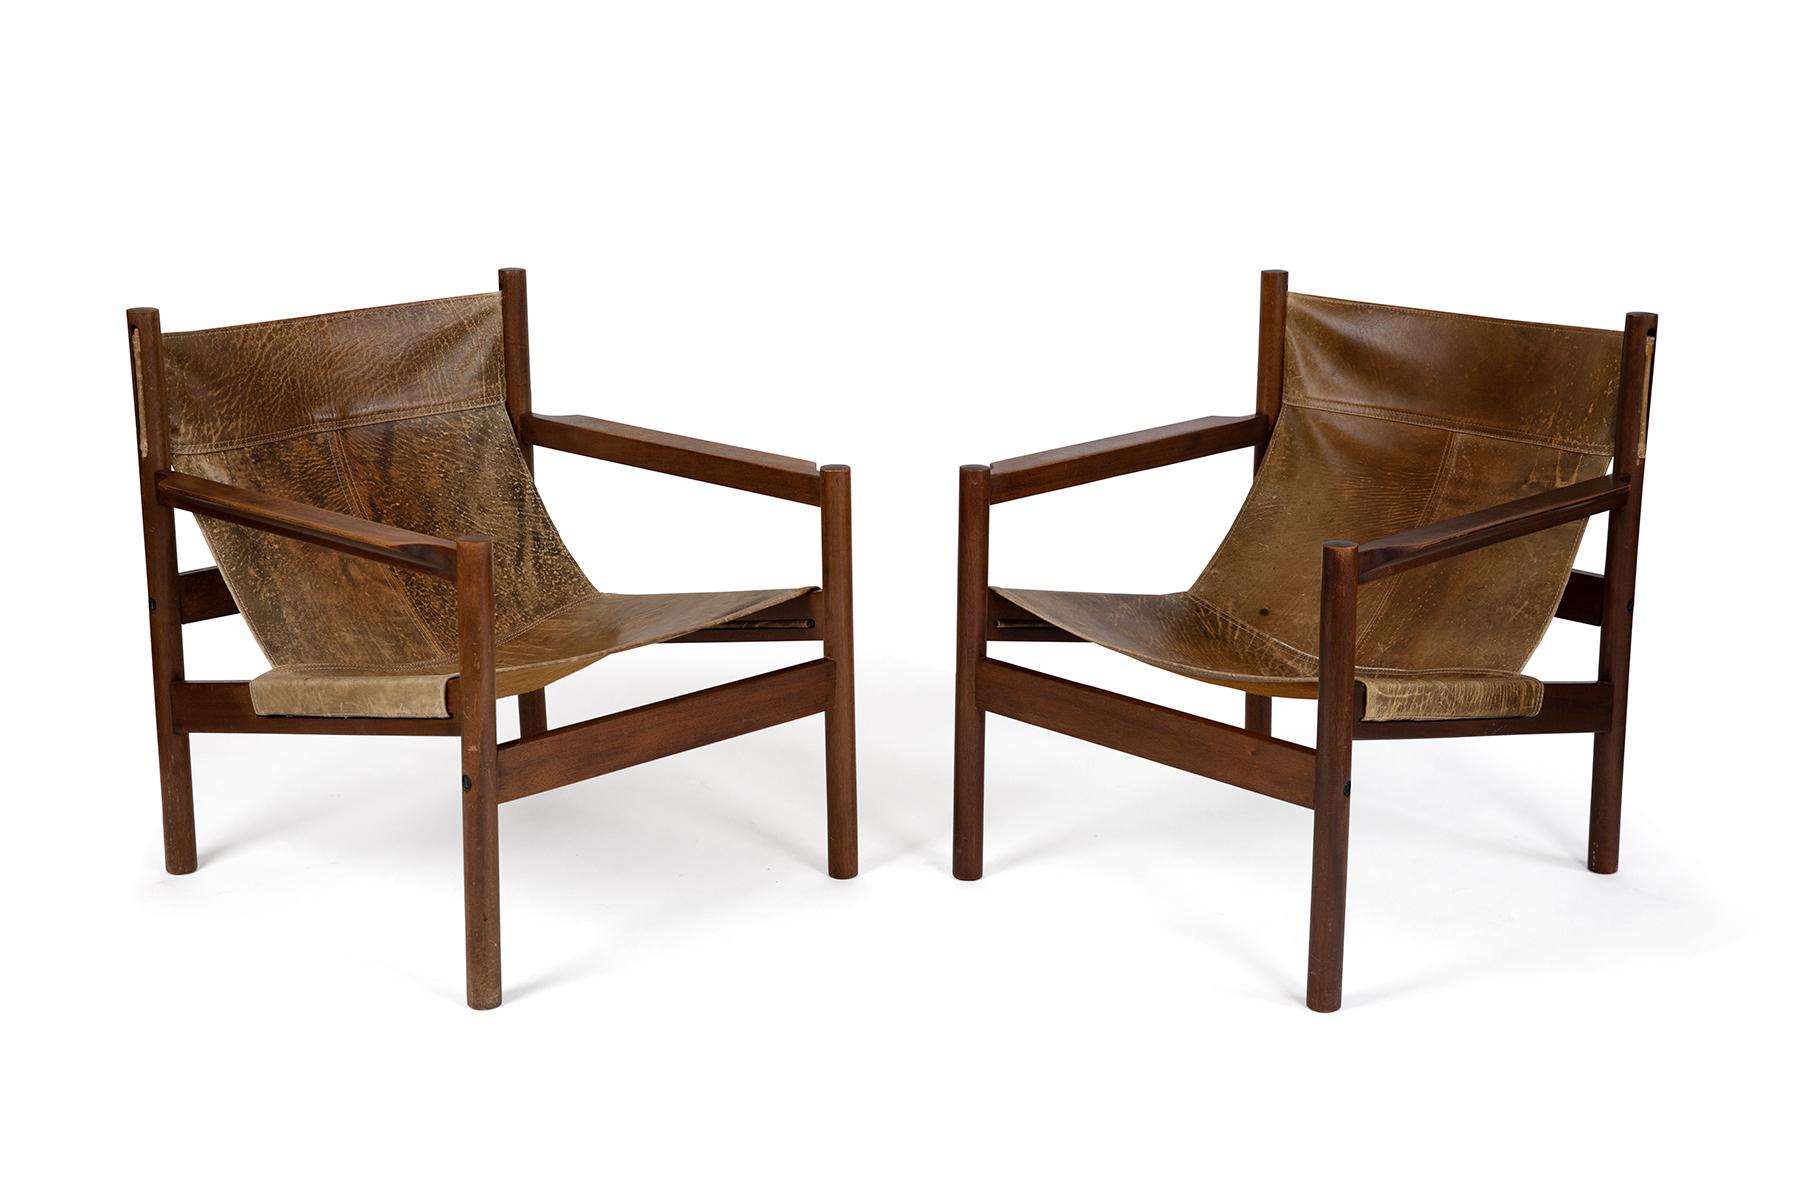 Rare Michel Arnoult wood and patinated leather sling style lounge chairs from Brazil. The leather on the back of one chair still sports the branding mark from the cowhide. Price listed is for the pair.